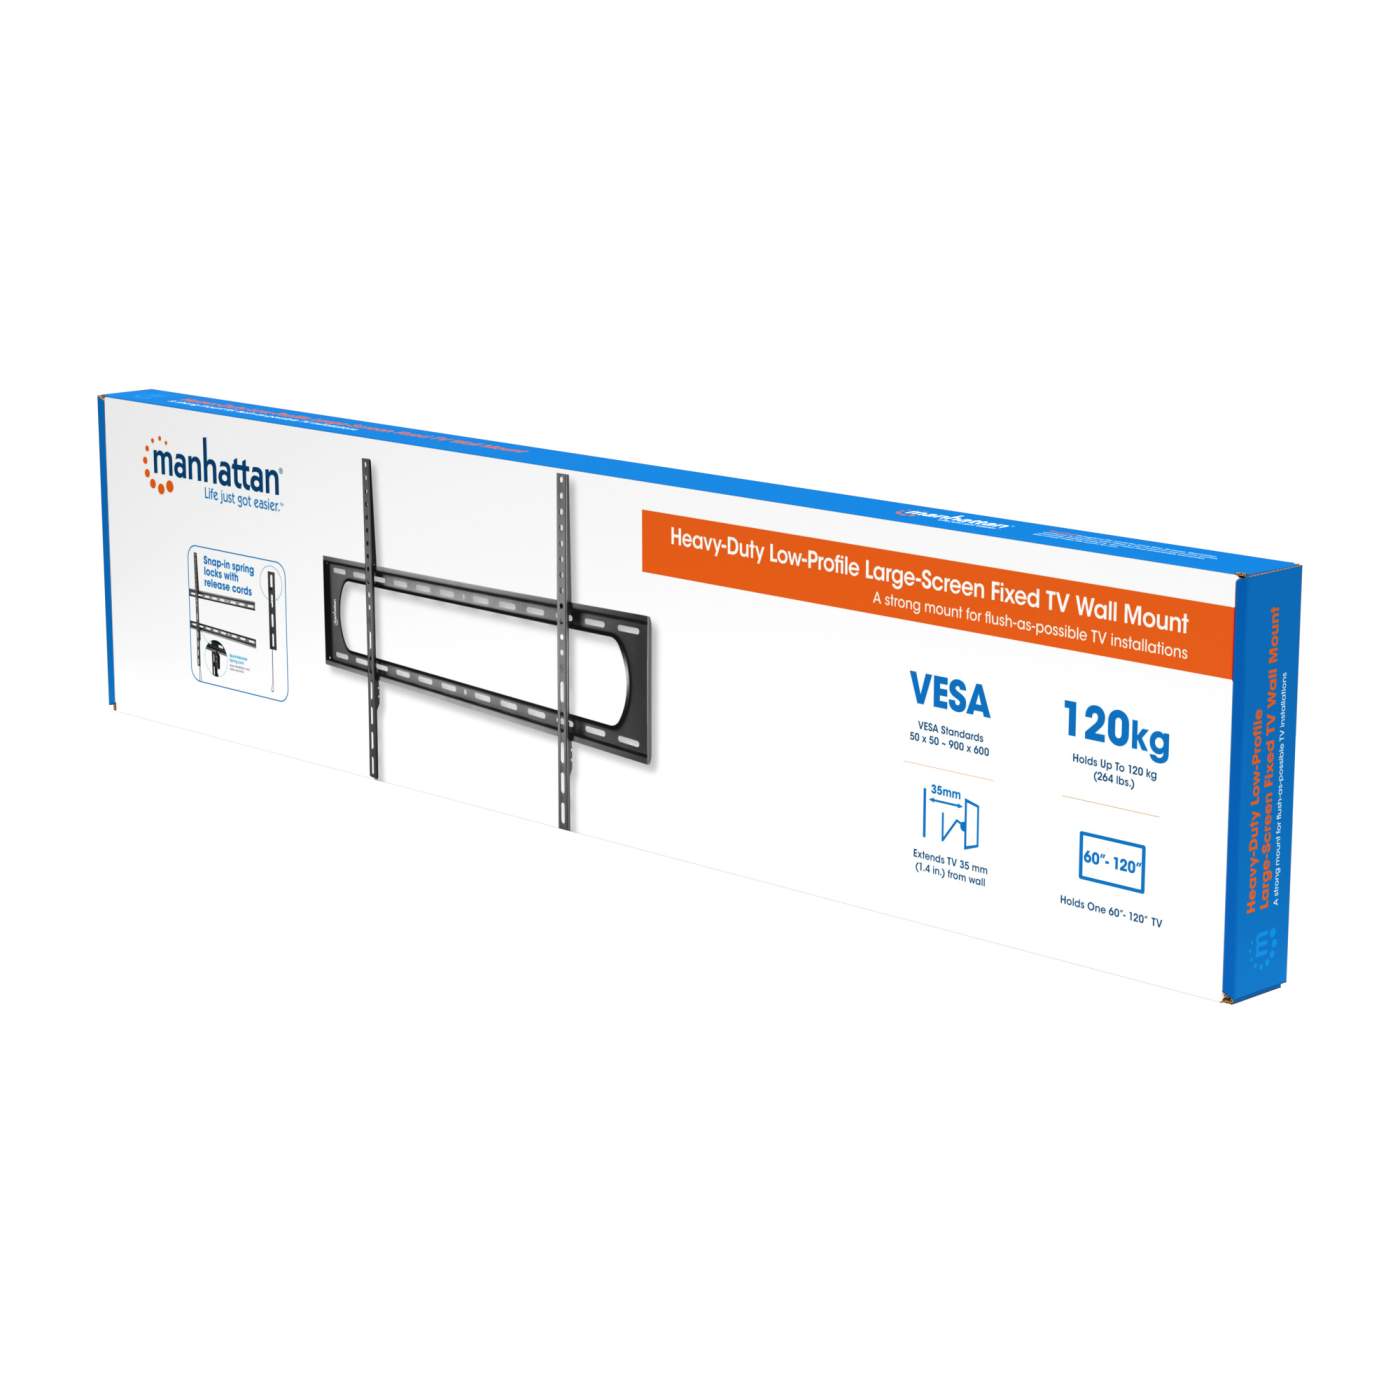 Heavy-Duty Low-Profile Large-Screen Fixed TV Wall Mount Packaging Image 2